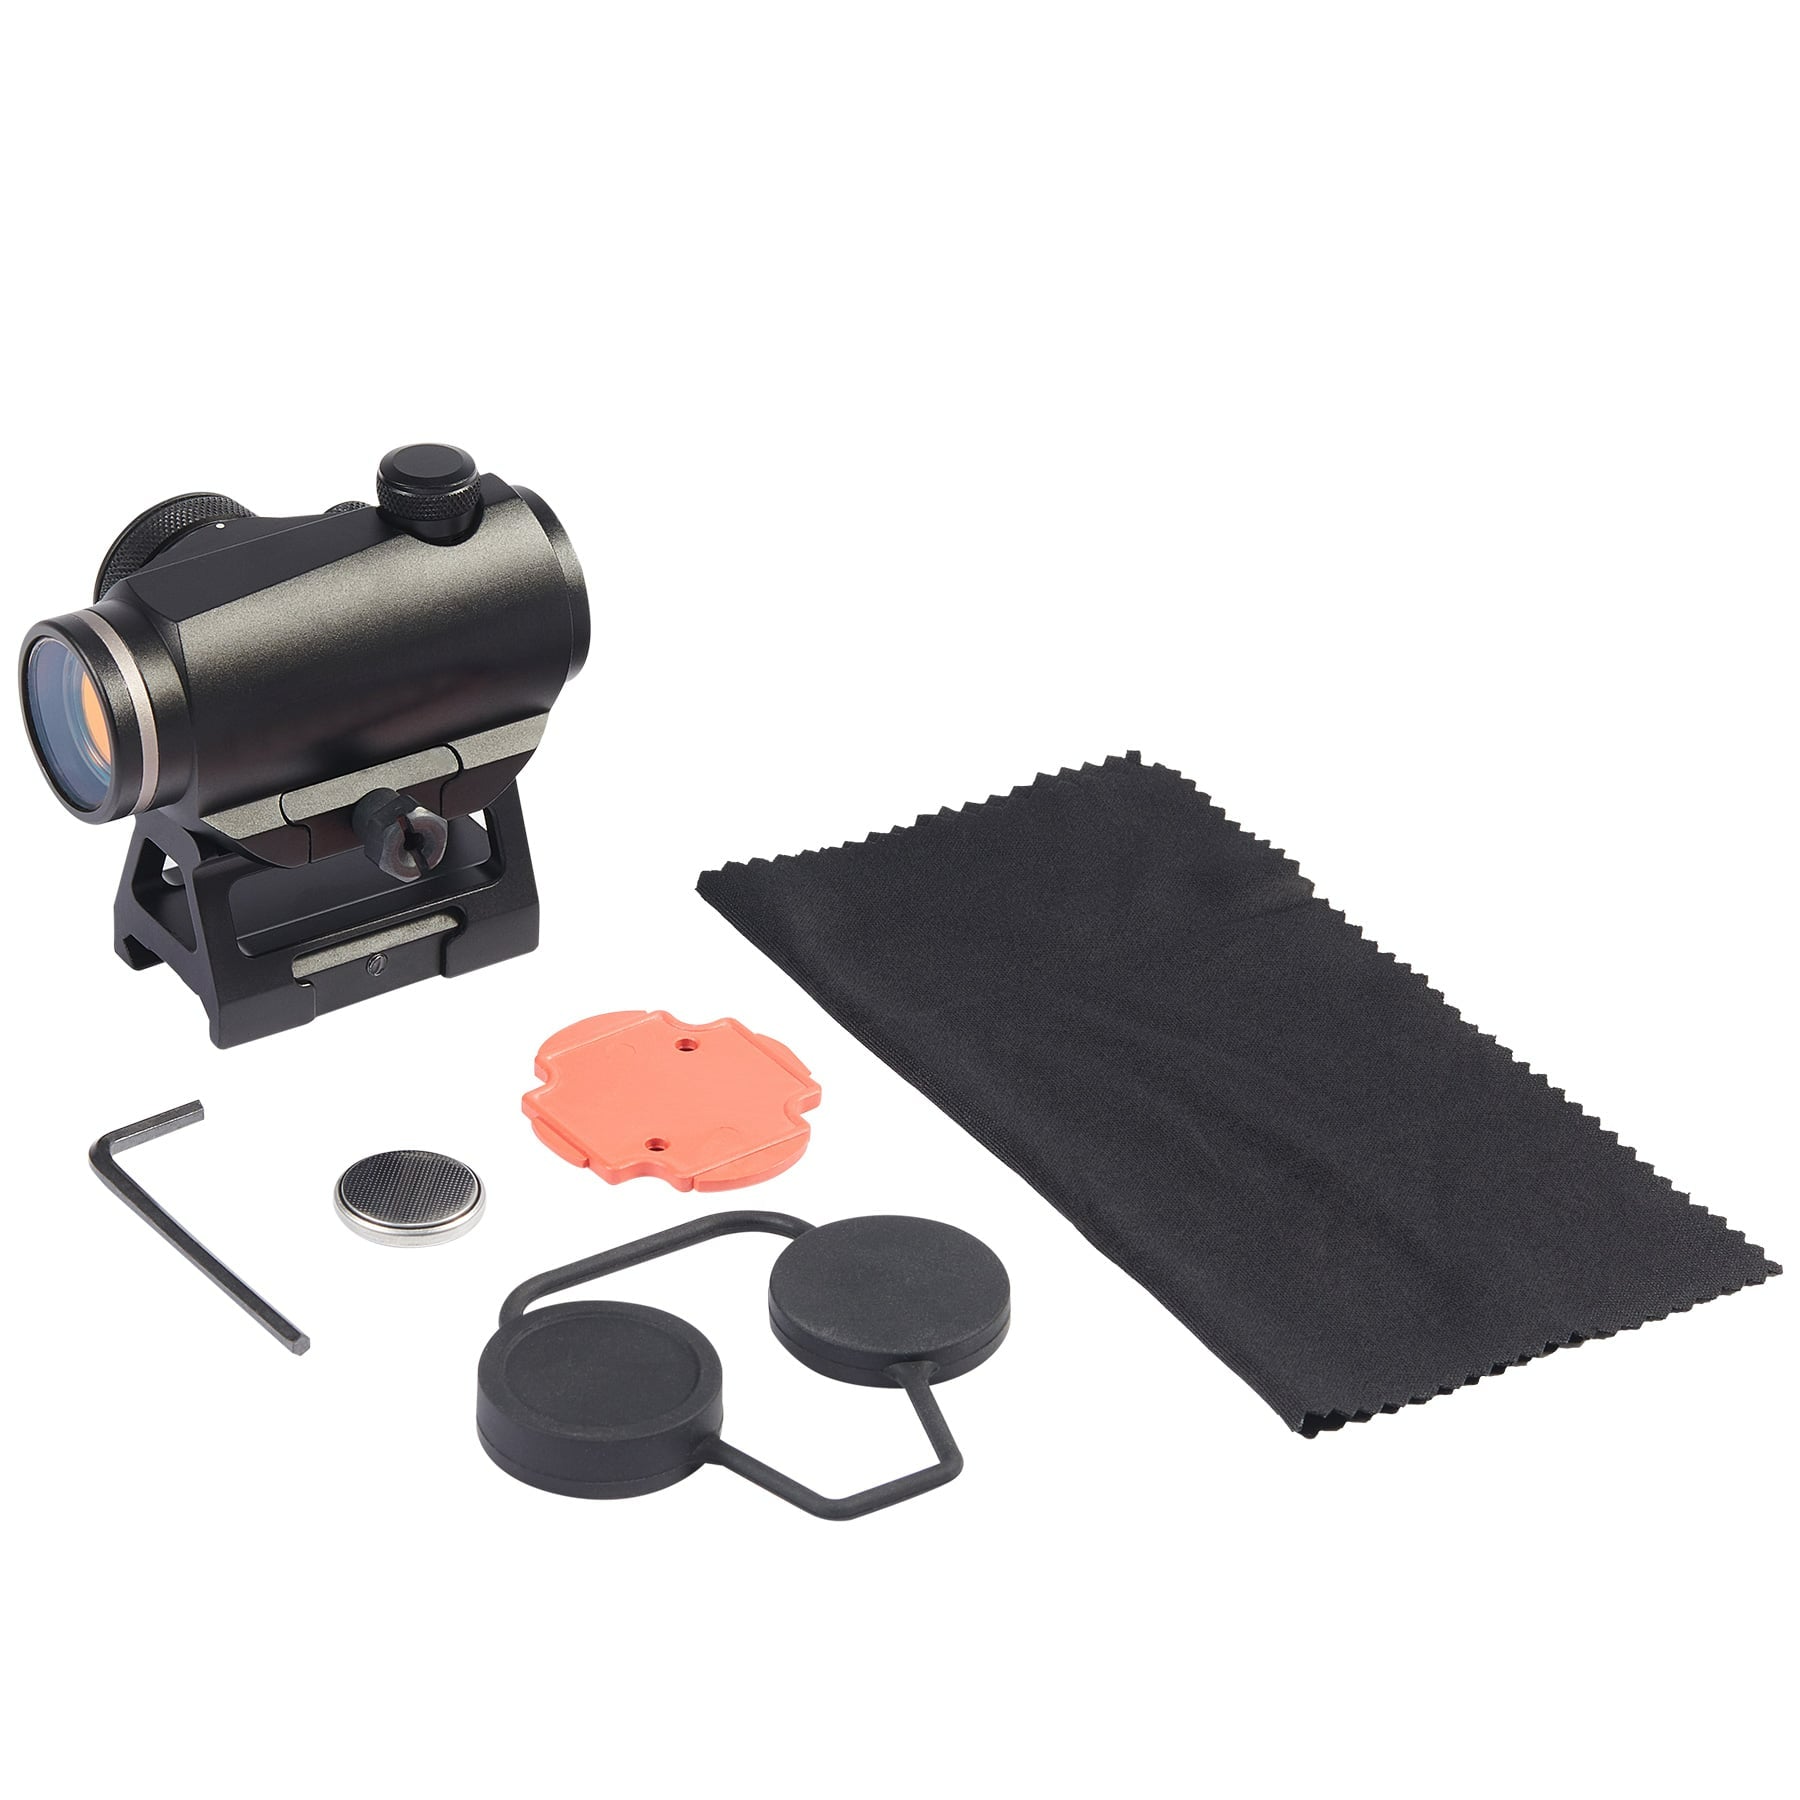 1x20 Red Dot Sight, Micro Reflex Dot Sight 4.5 MOA Rifle Scope with 20mm Objective Lens for Standard Picatinny or Weaver Rail Pistols Rifles Airsoft BB Pellet Guns, Includes Battery, Black